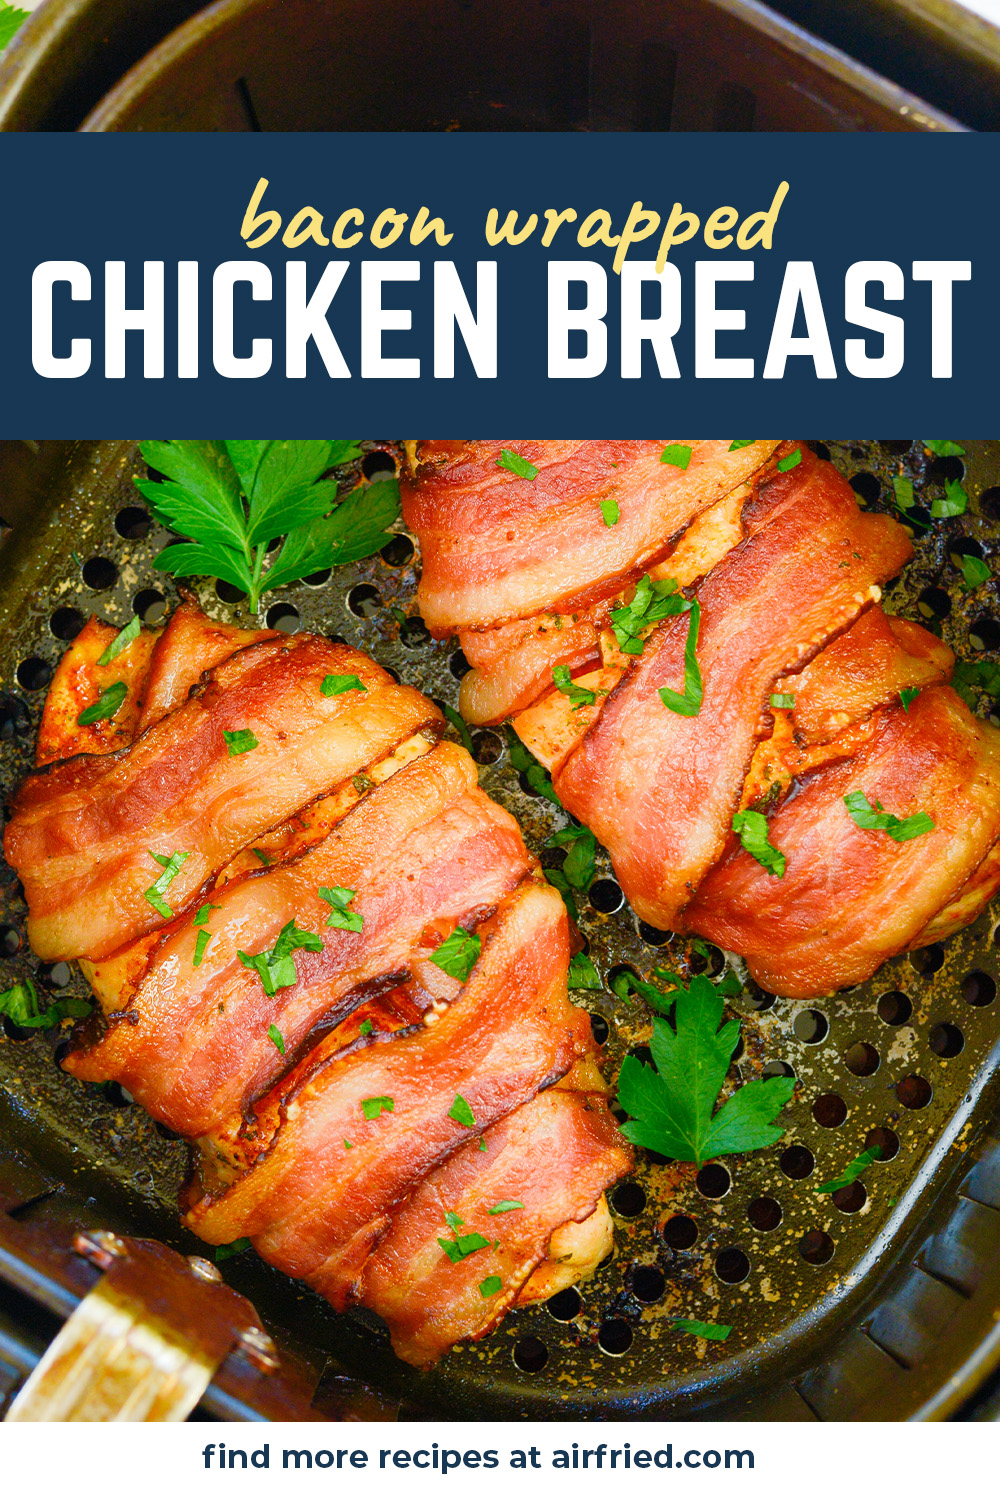 Bacon wrapped chicken breast is what dreams are made of!